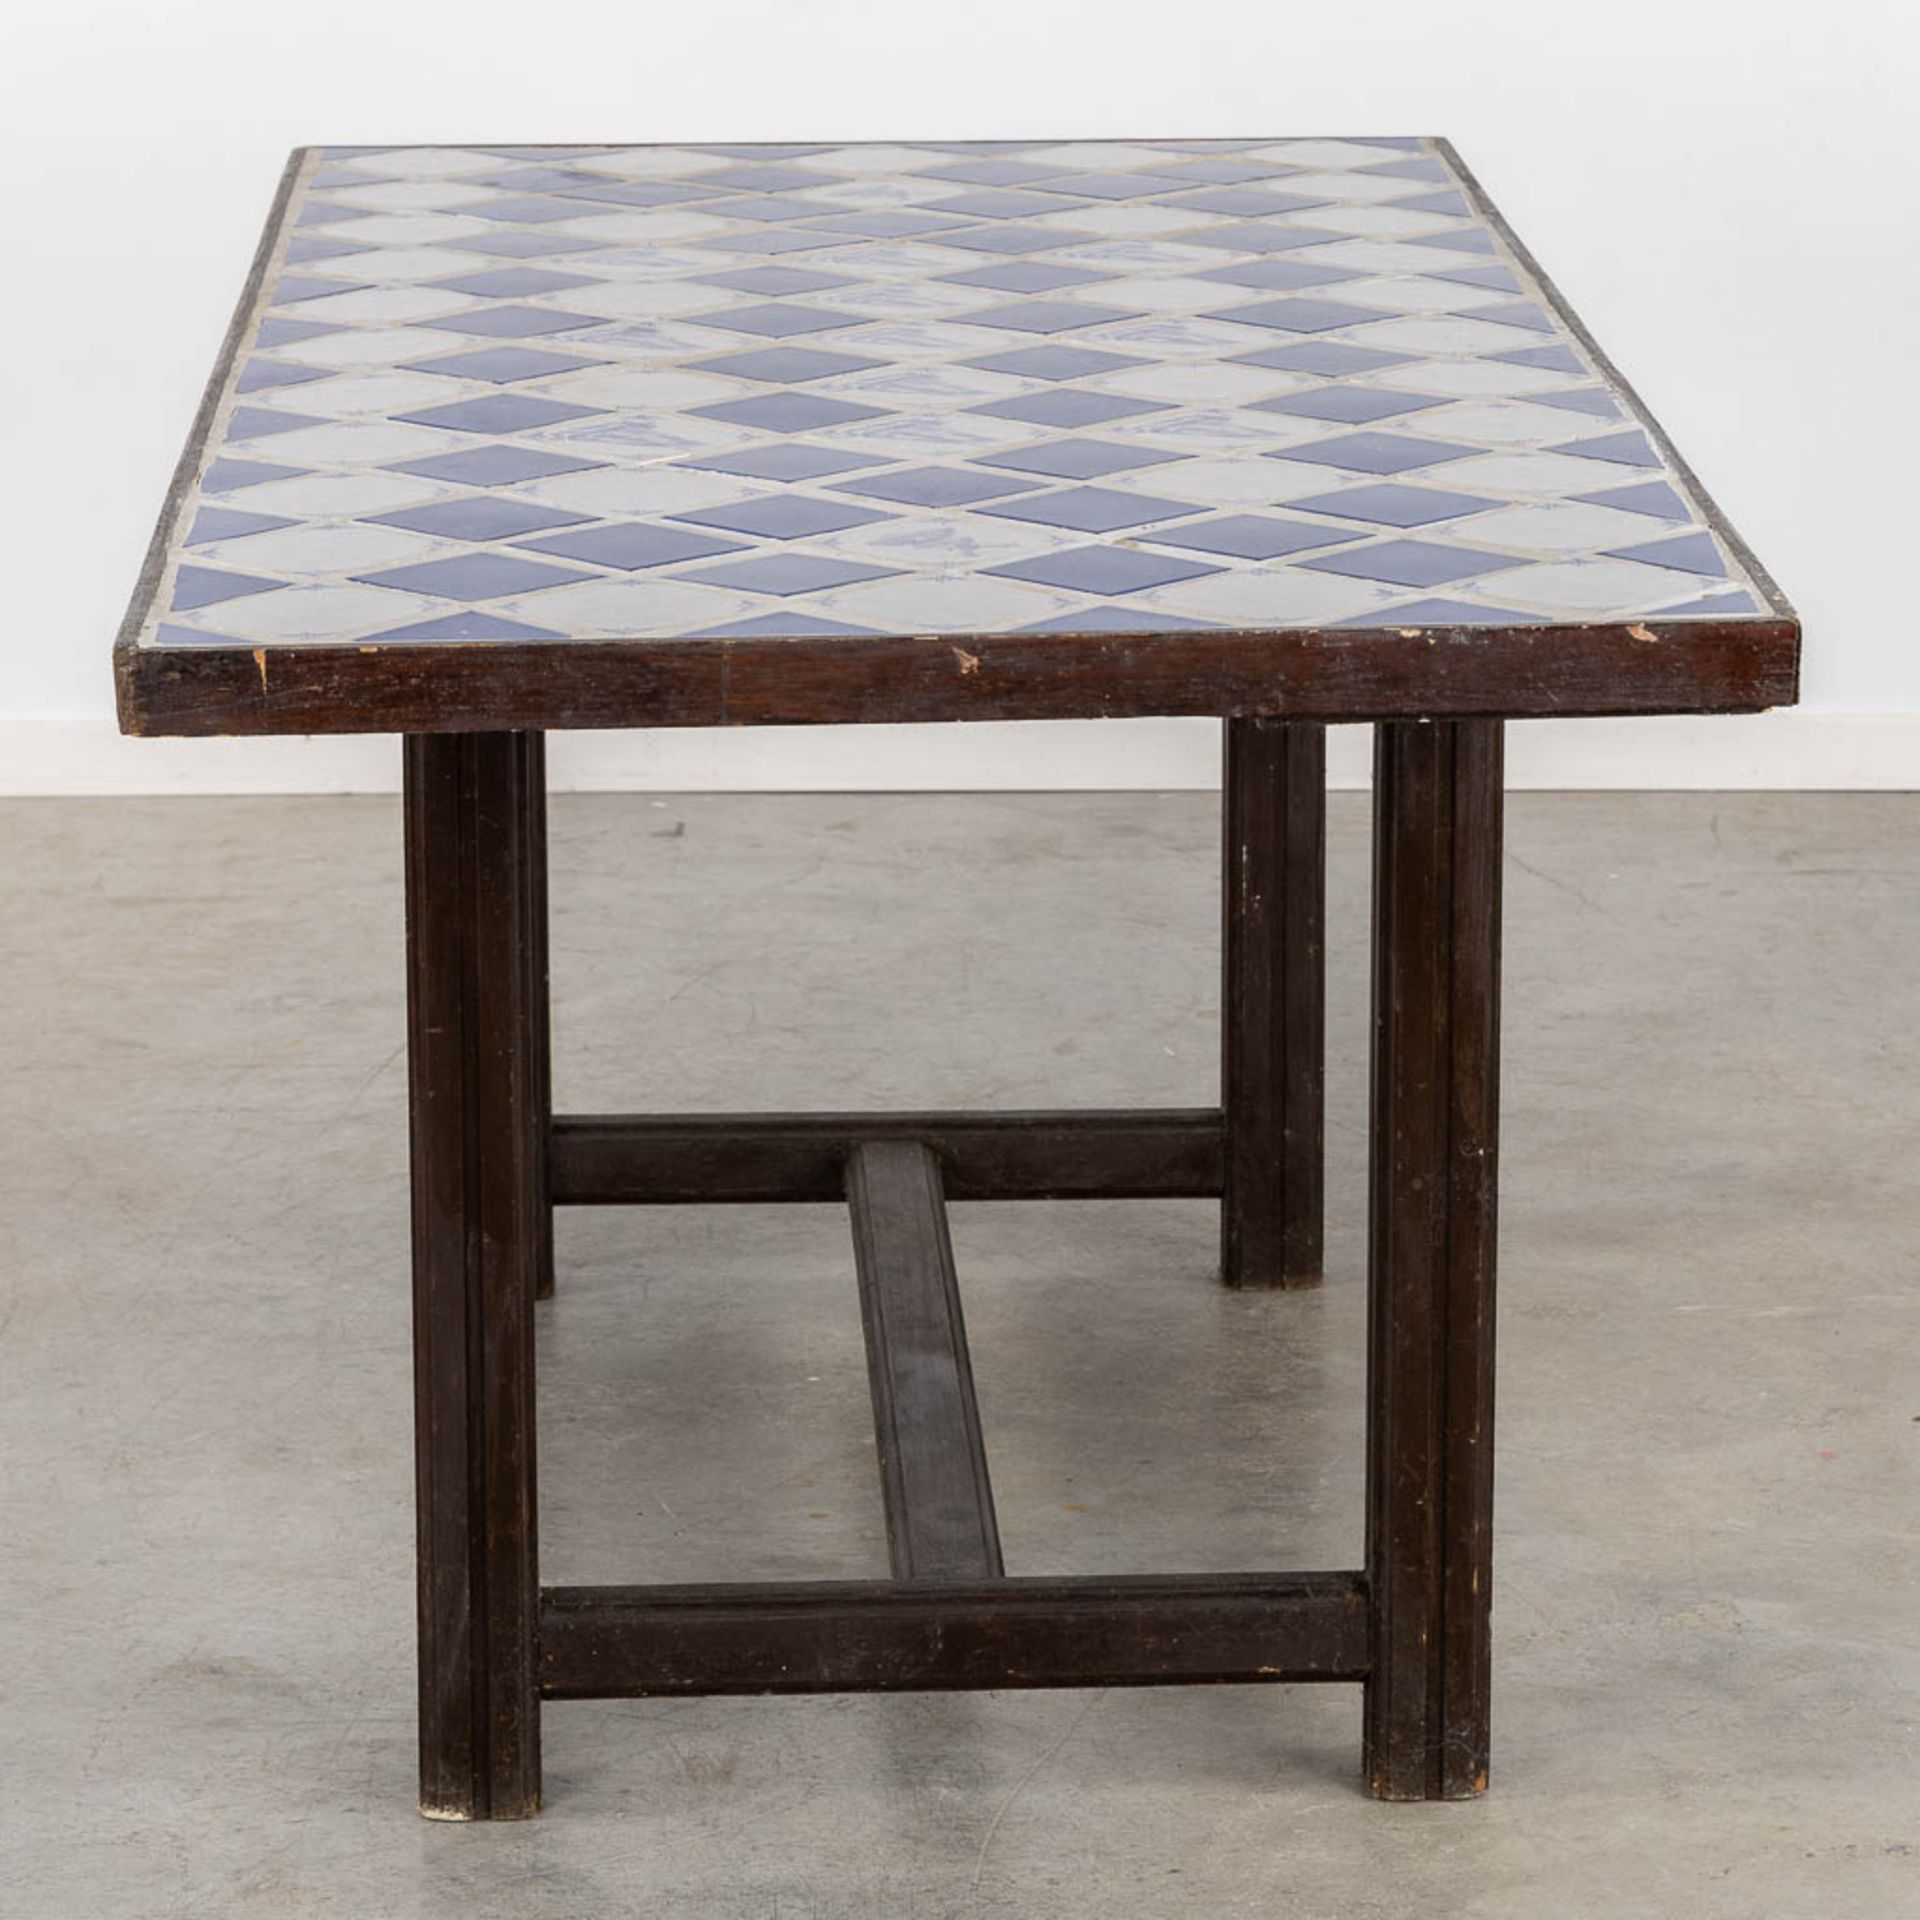 A Spanish table, finished with white and blue tiles. (L:85 x W:184 x H:76 cm) - Image 4 of 11